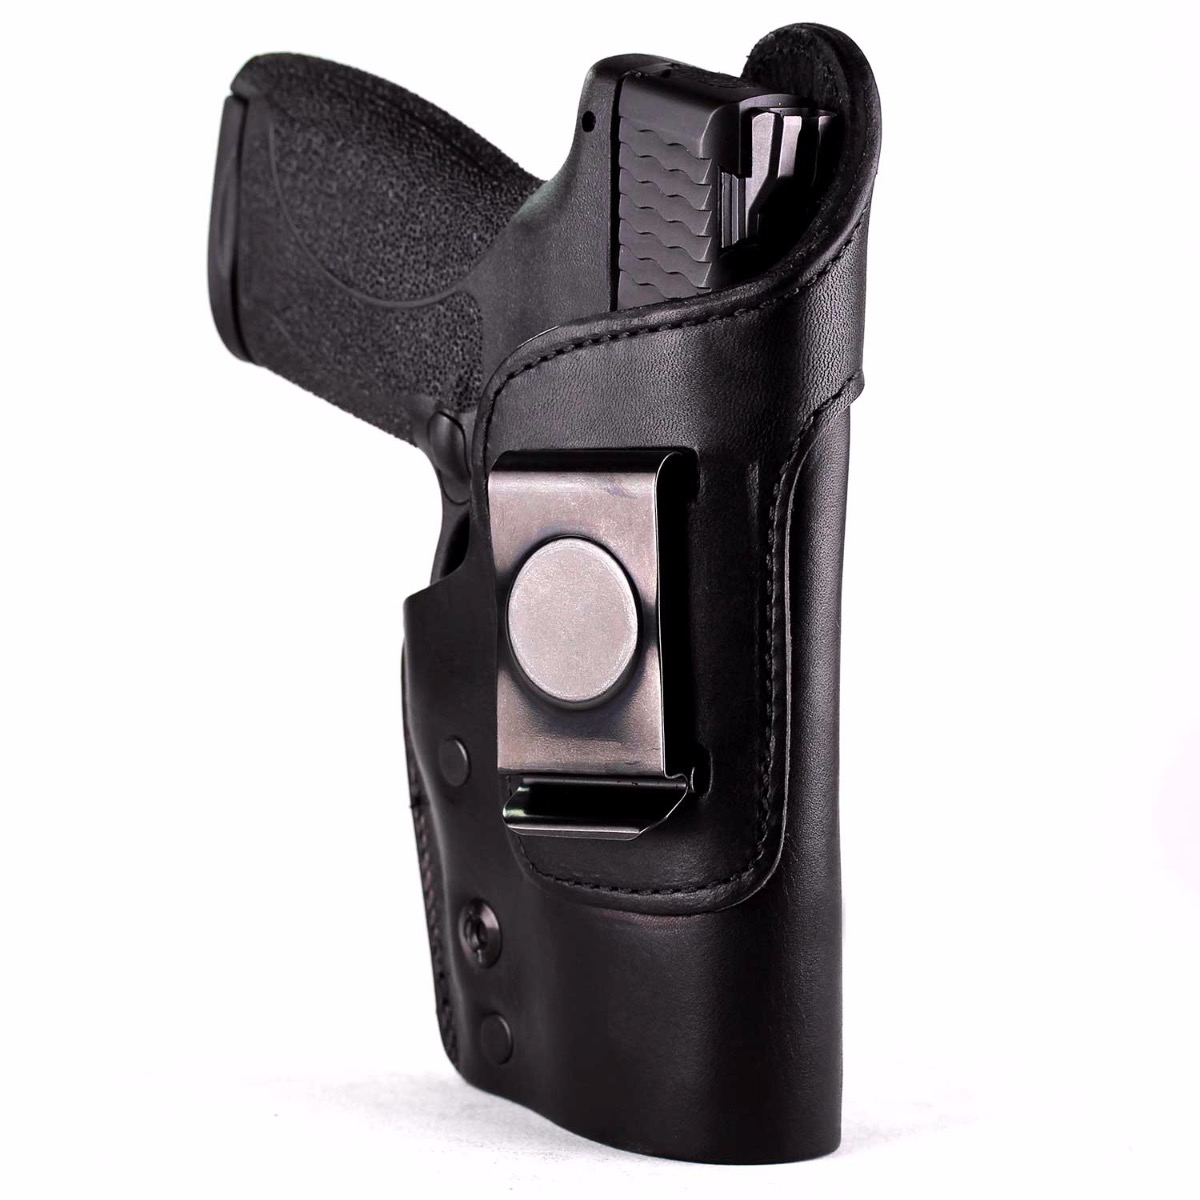 Pro-tech Nylon Ankle Holster For Smith & Wesson M&P 22 Compact 